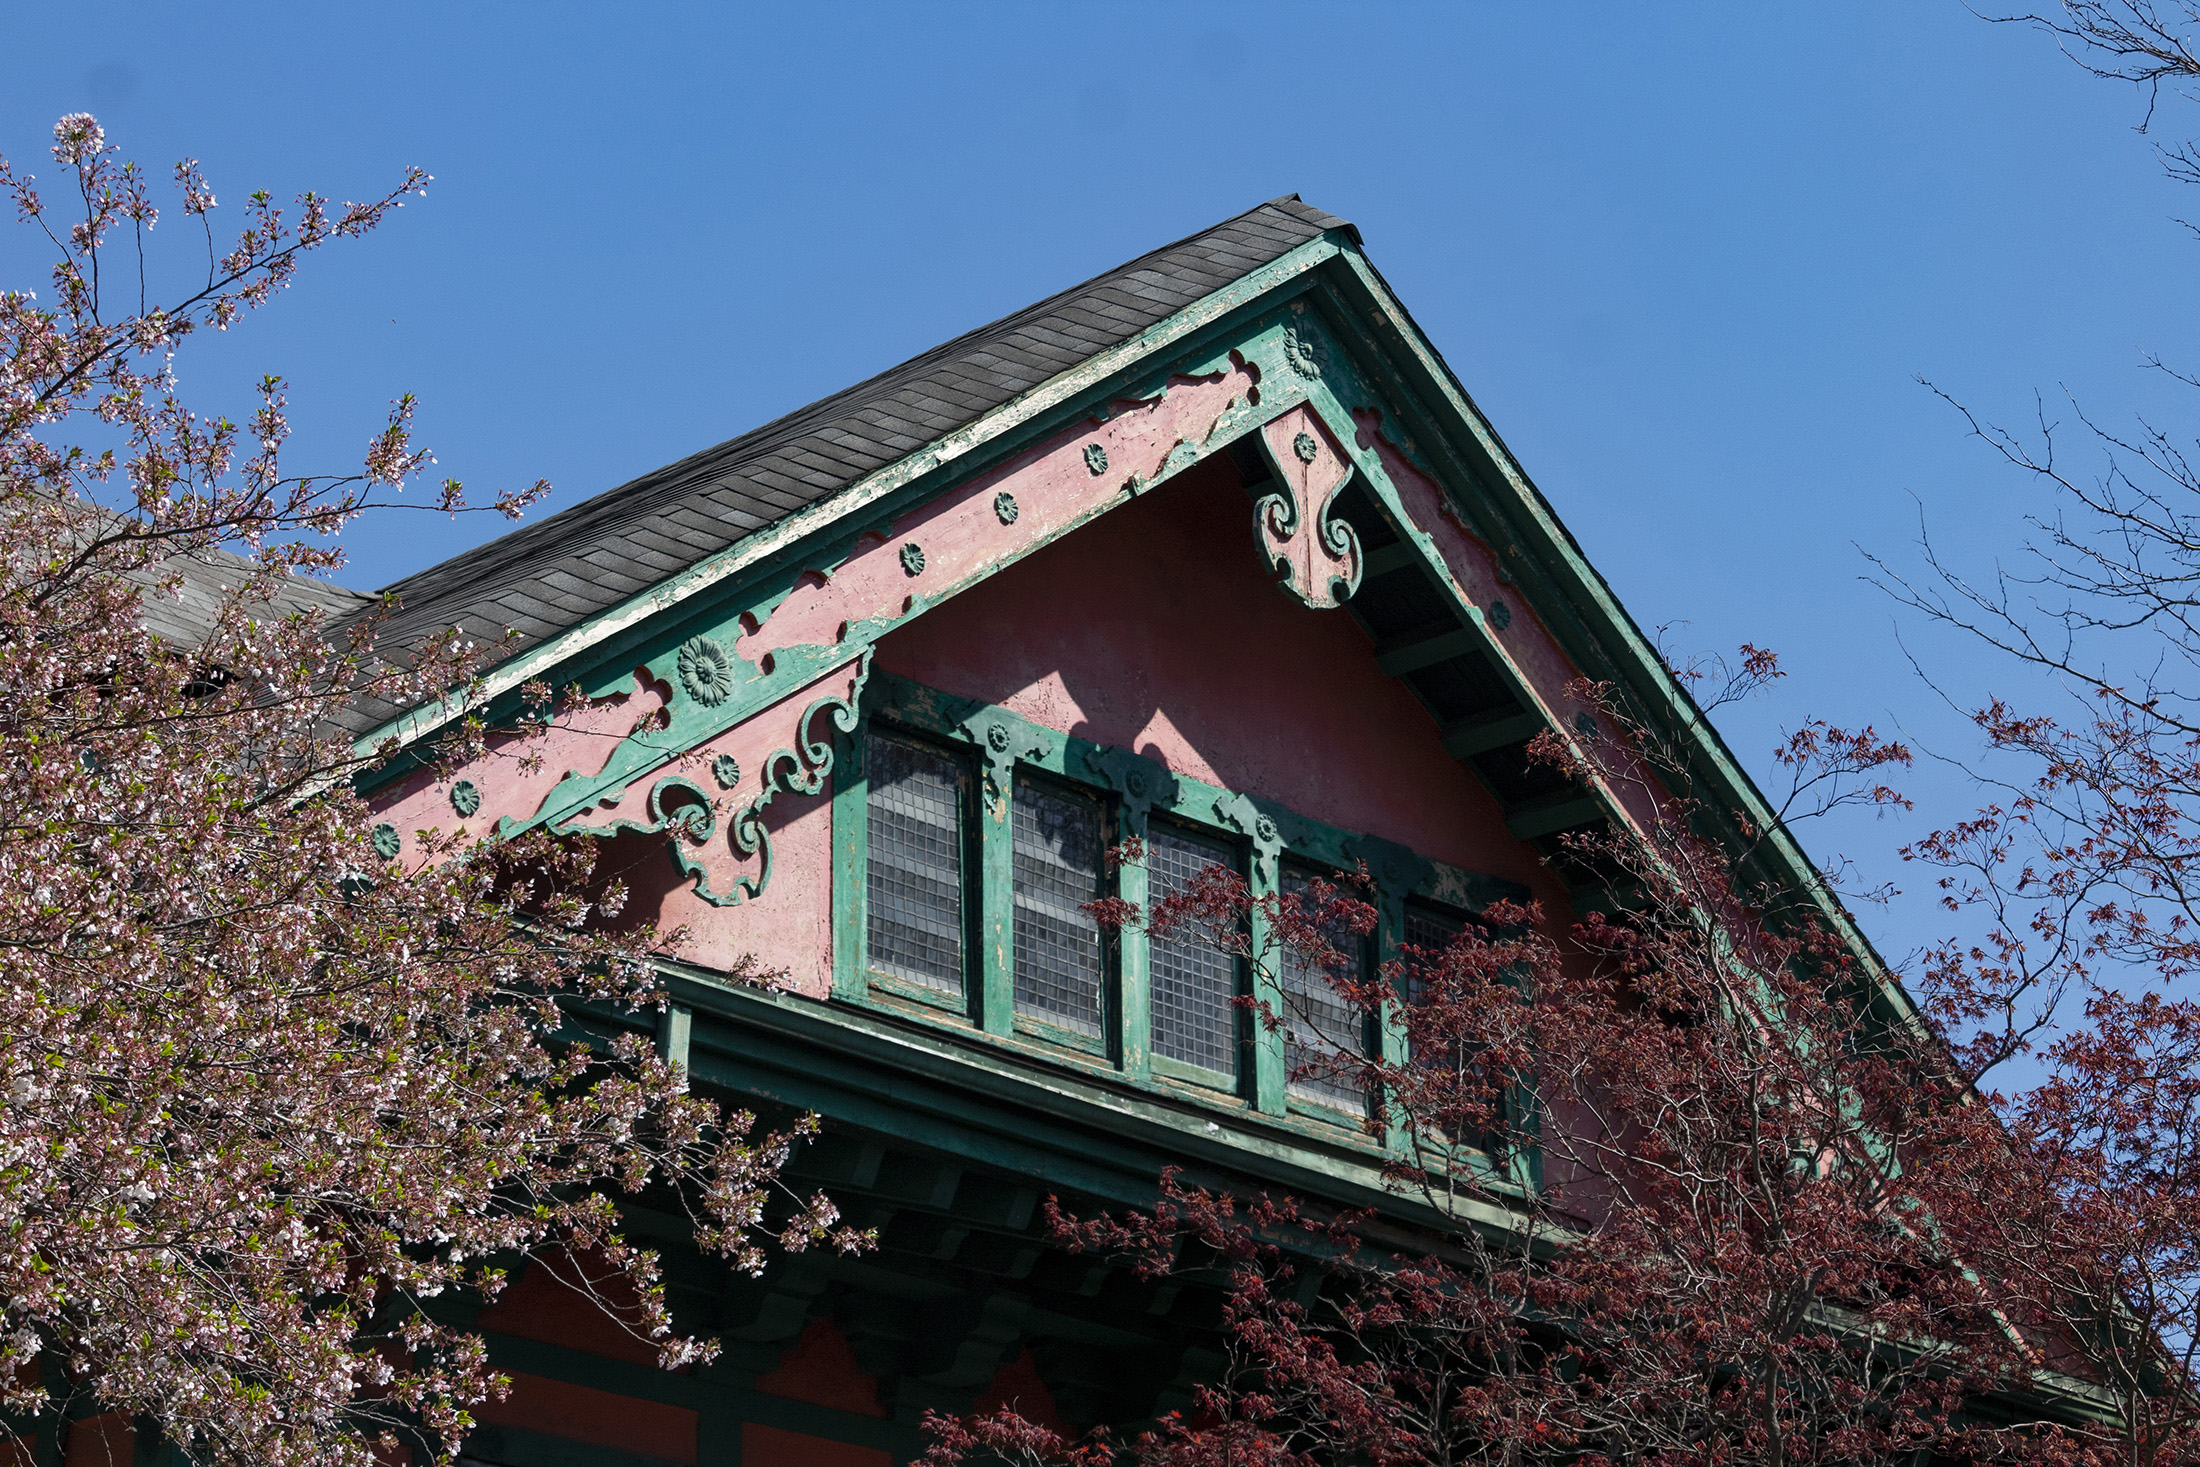 spring trees in bloom frame the decorated gable of the house